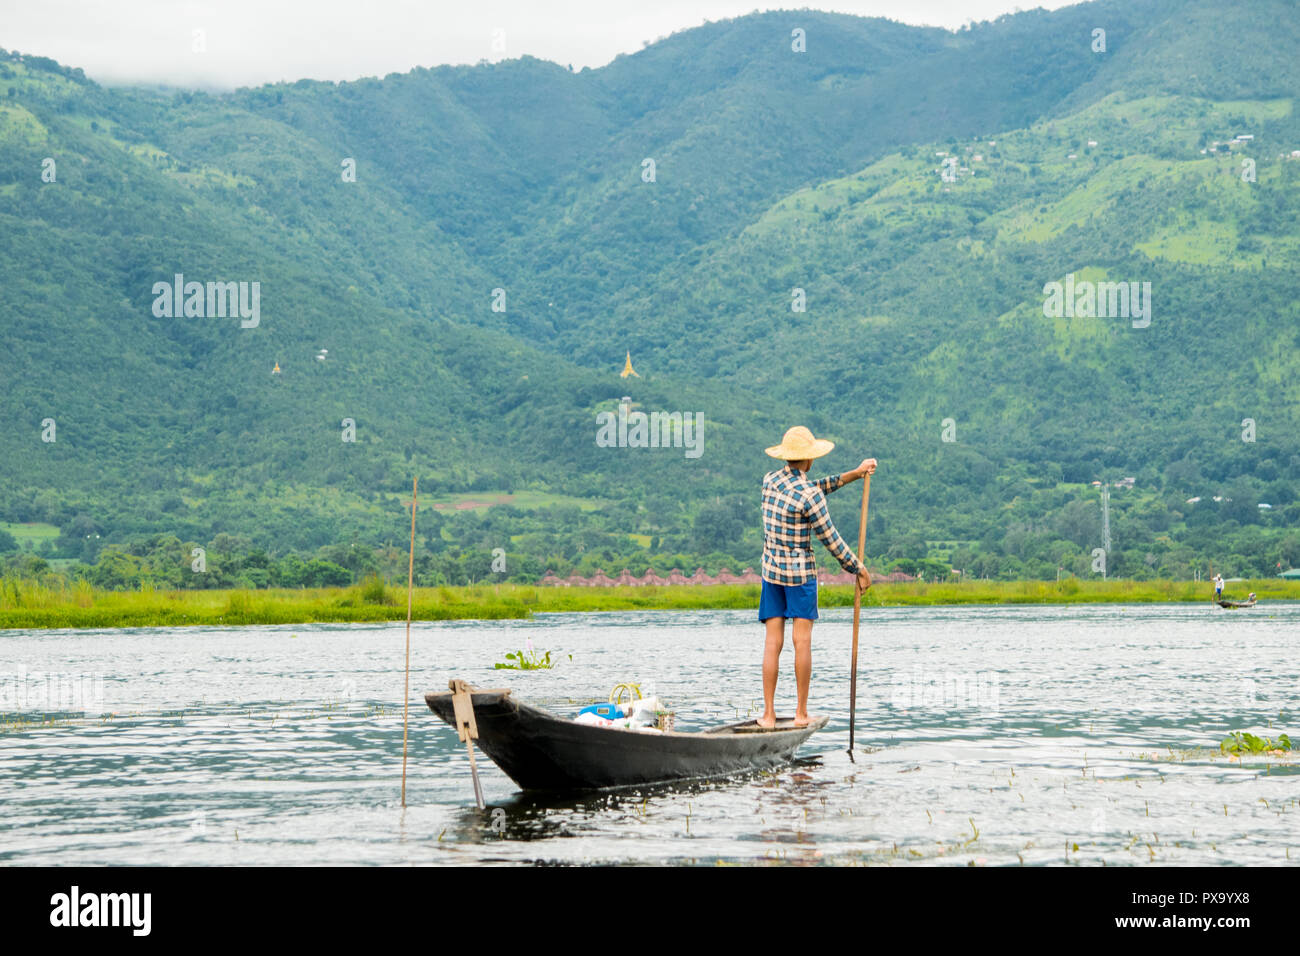 Local young Burmese fisherman wearing a checked shirt returning home after fishing, standing on the edge of a thin tall boat, rowing back, Inle Lake Stock Photo